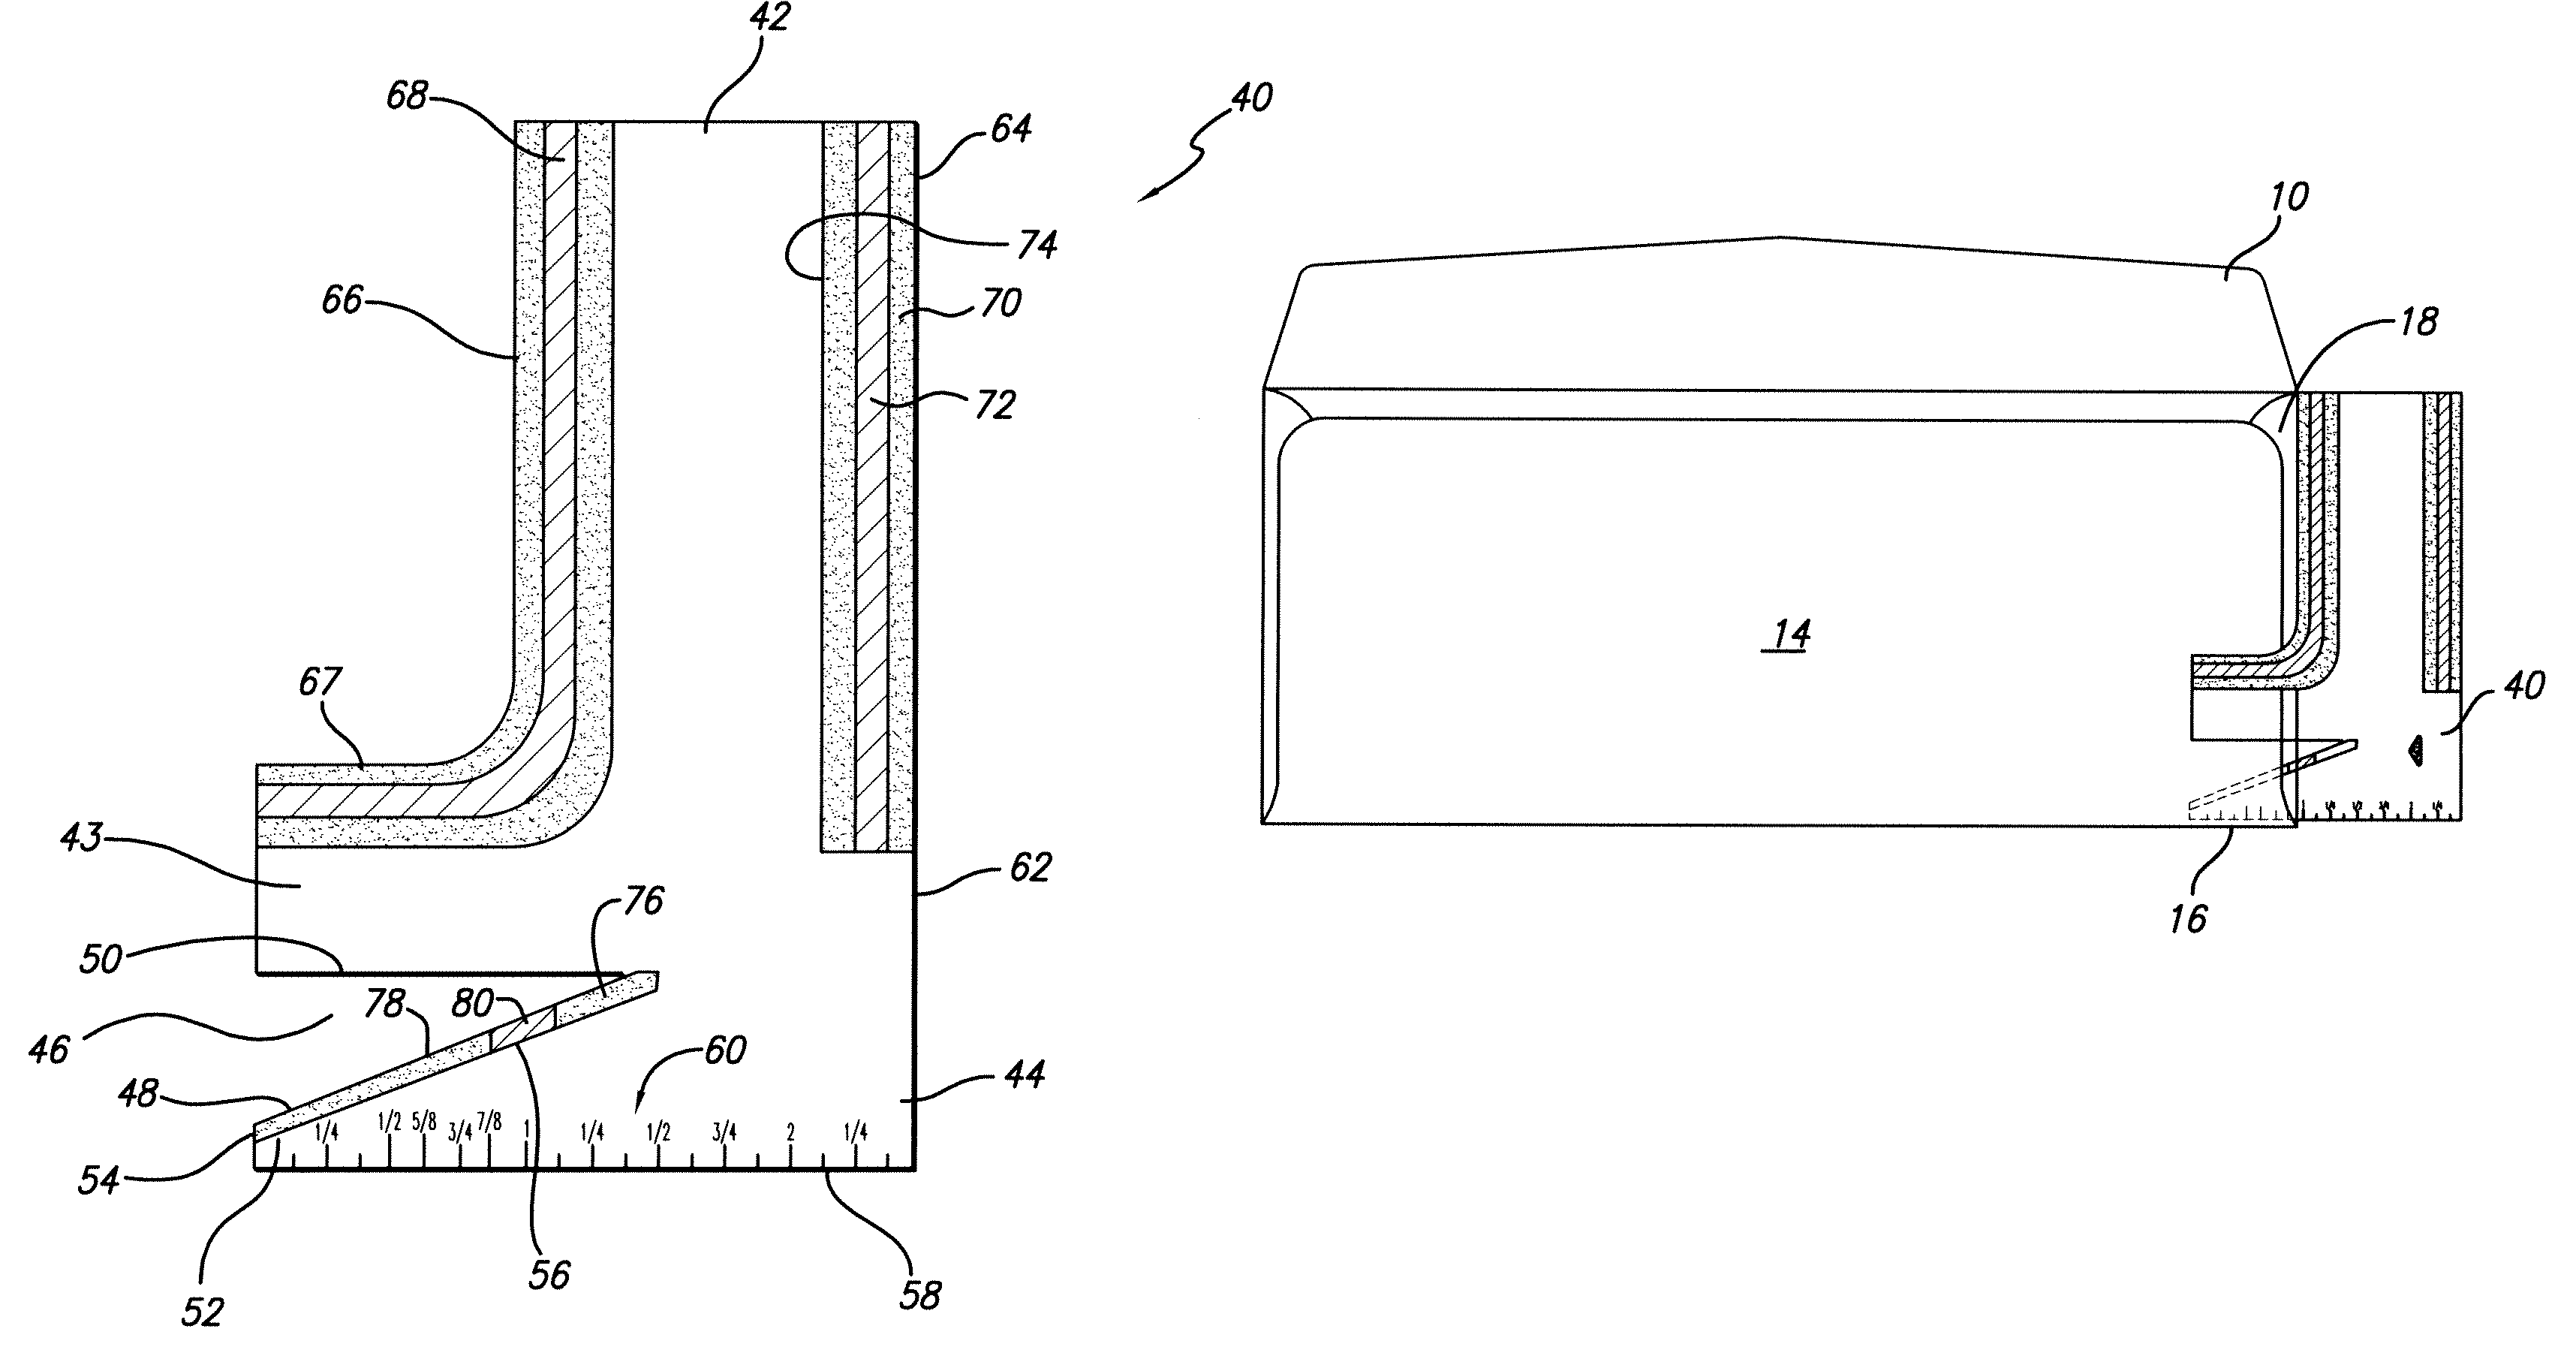 Apparatus and method for determining whether an envelope is in or out of specification